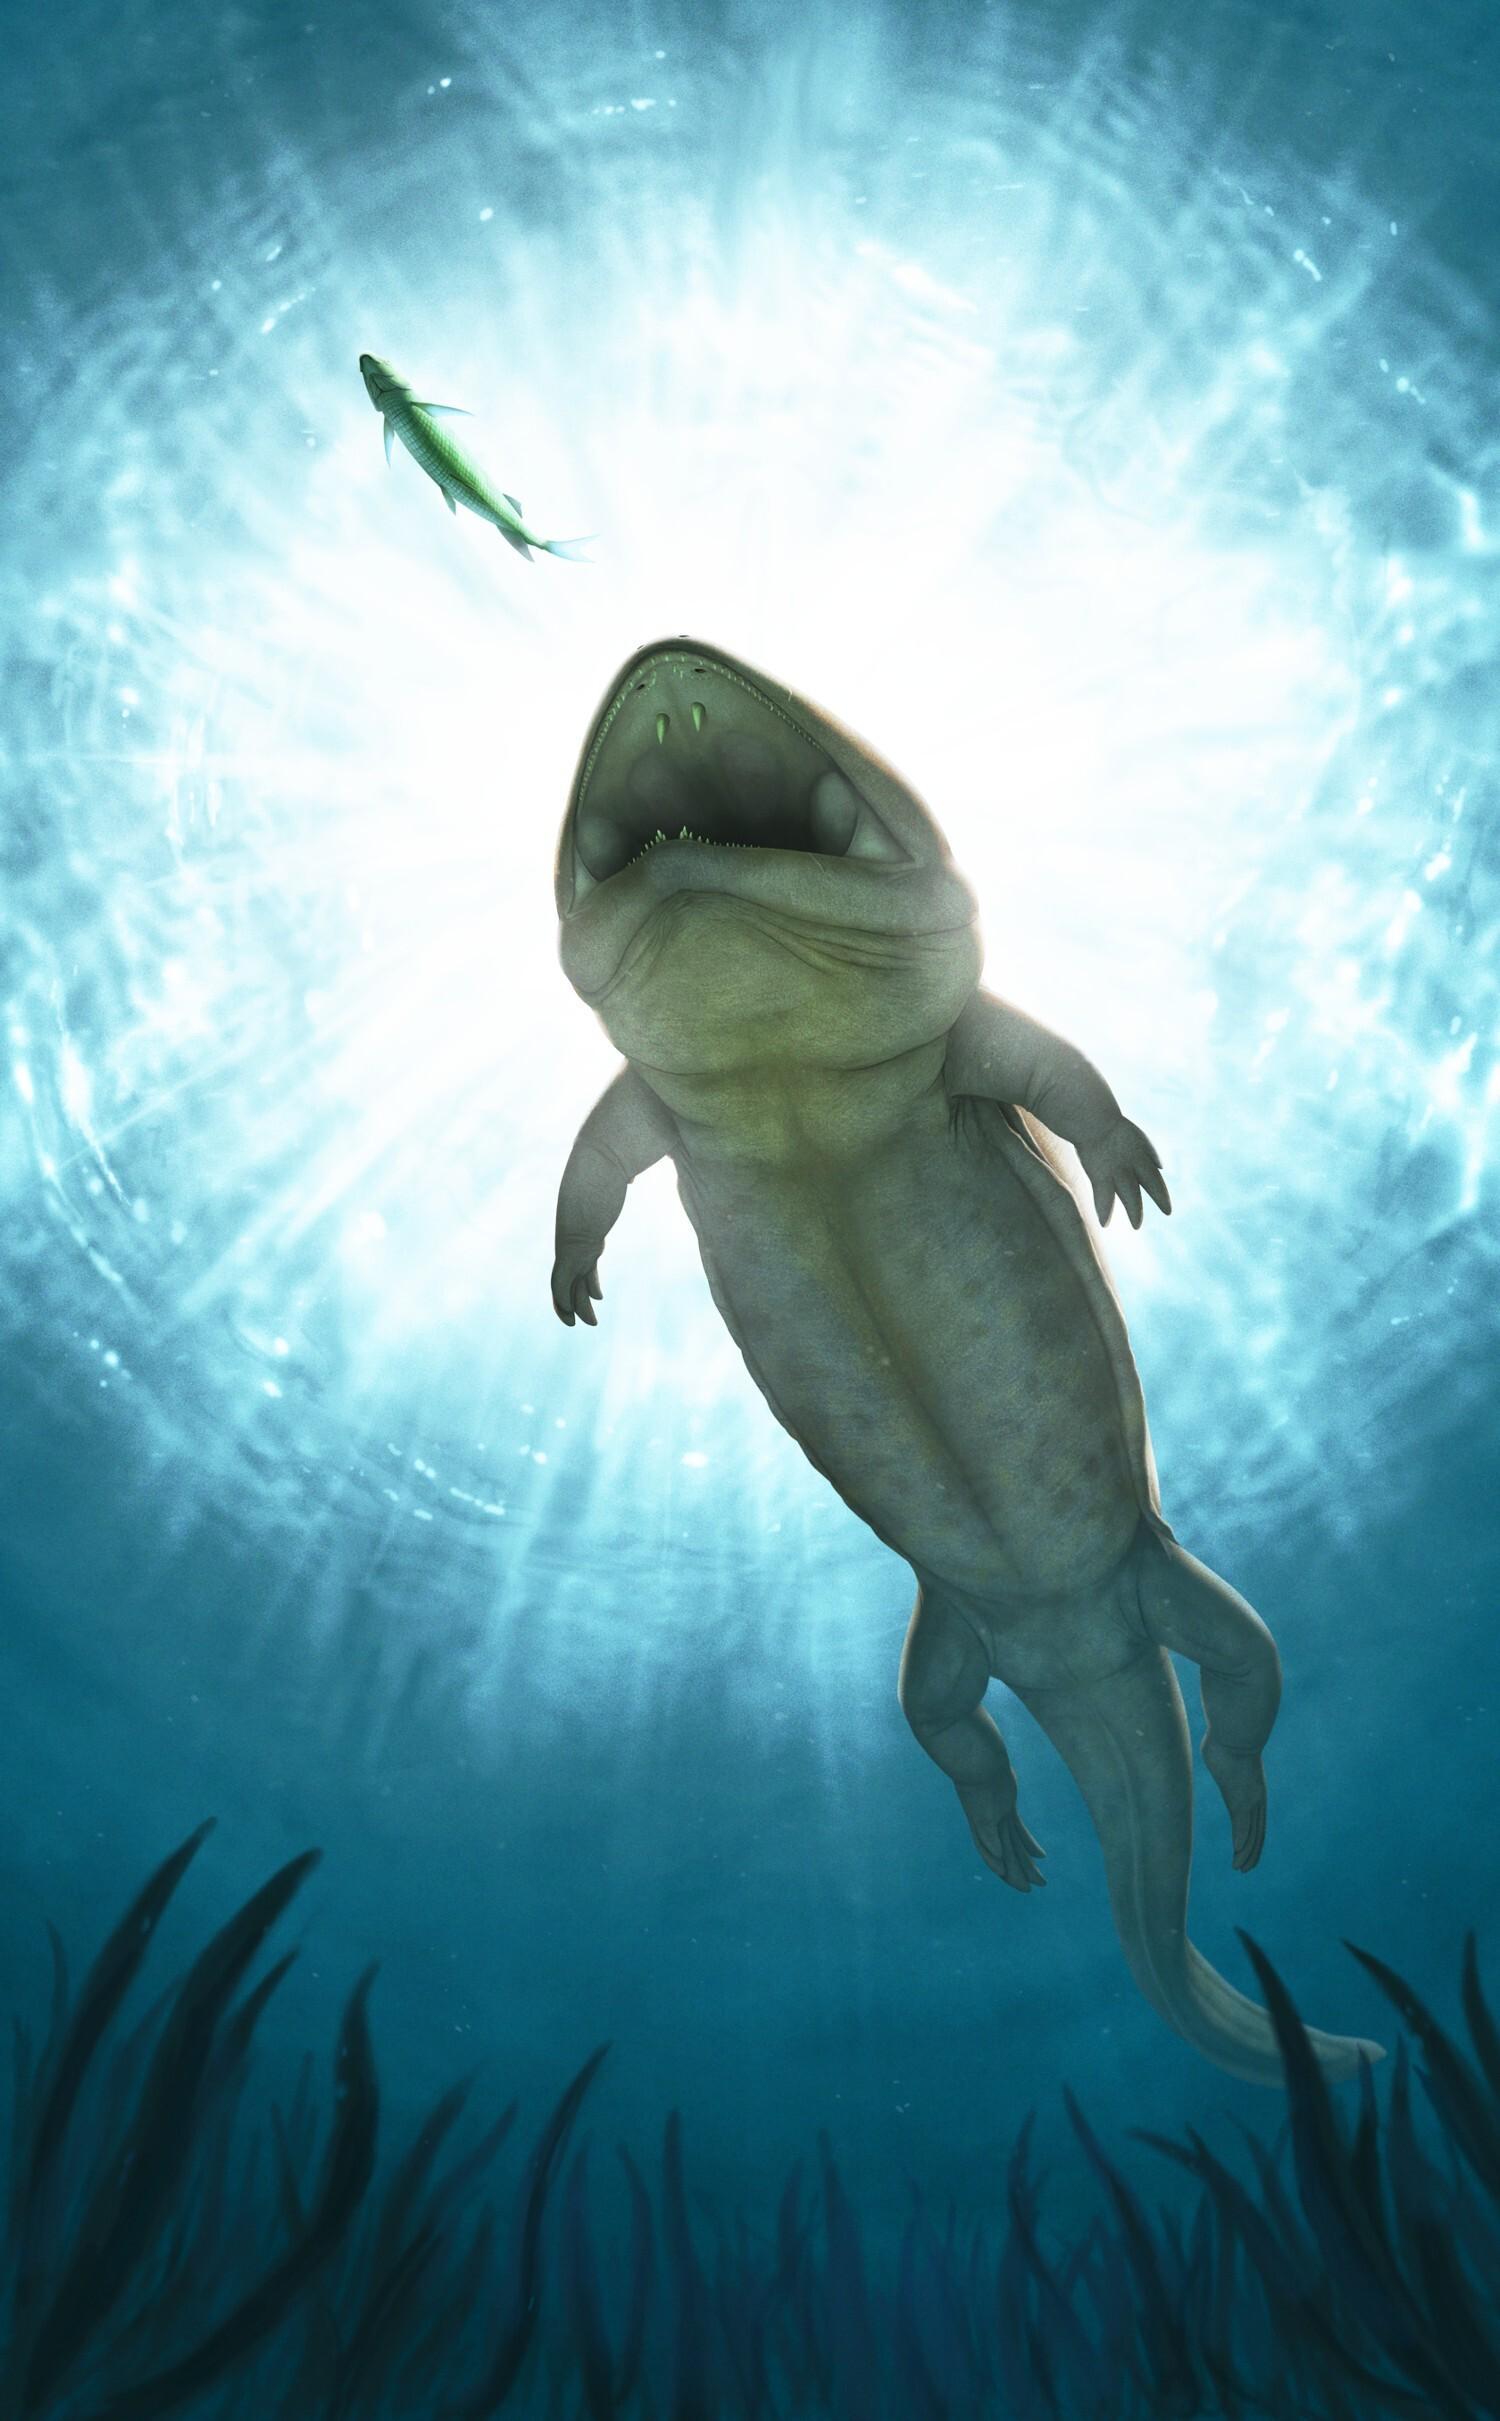 An artist's impression of Arenaerpeton supinatus, the ancestor of today's Chinese Giant Salamander.